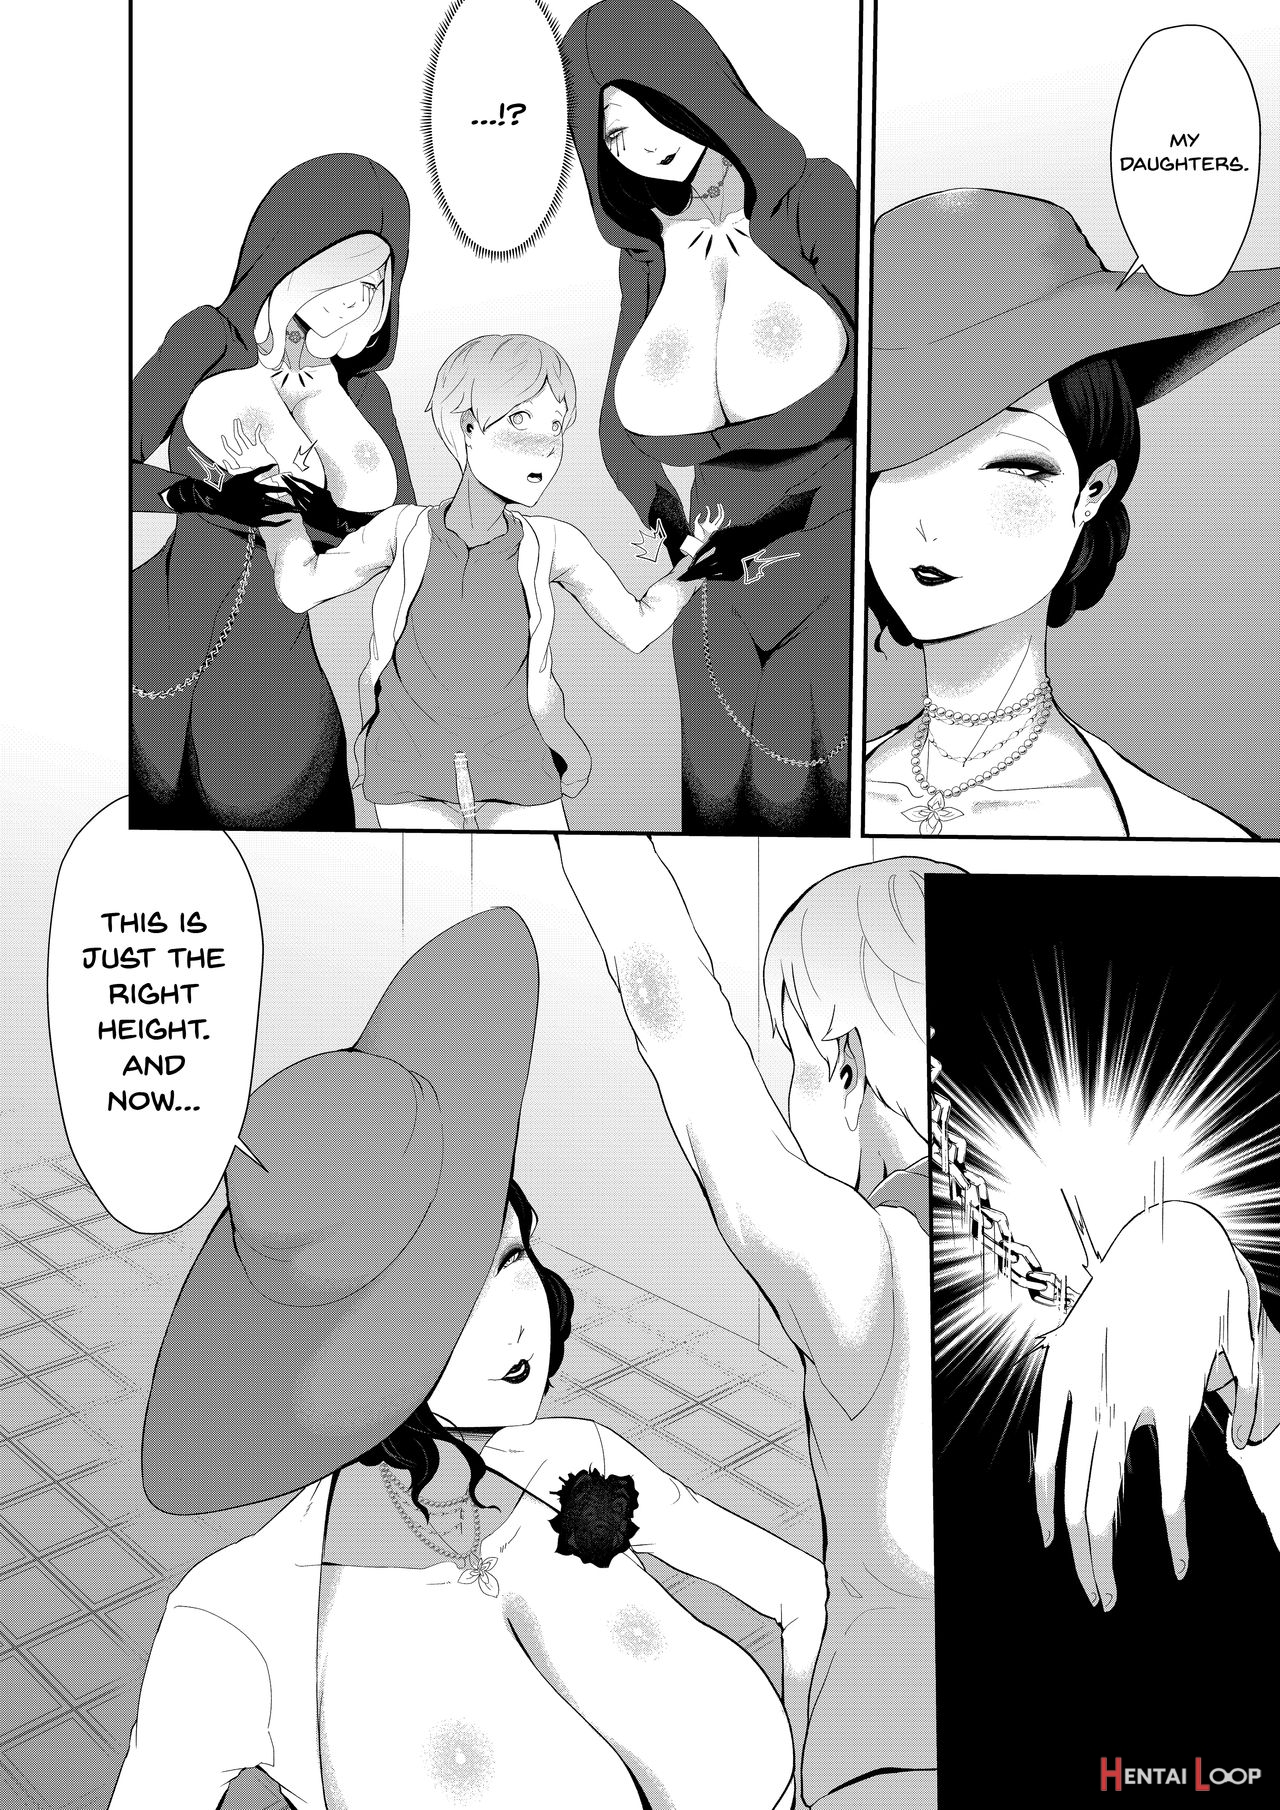 Dimitrescu-sama's Squeezing Out Your Sperm page 7